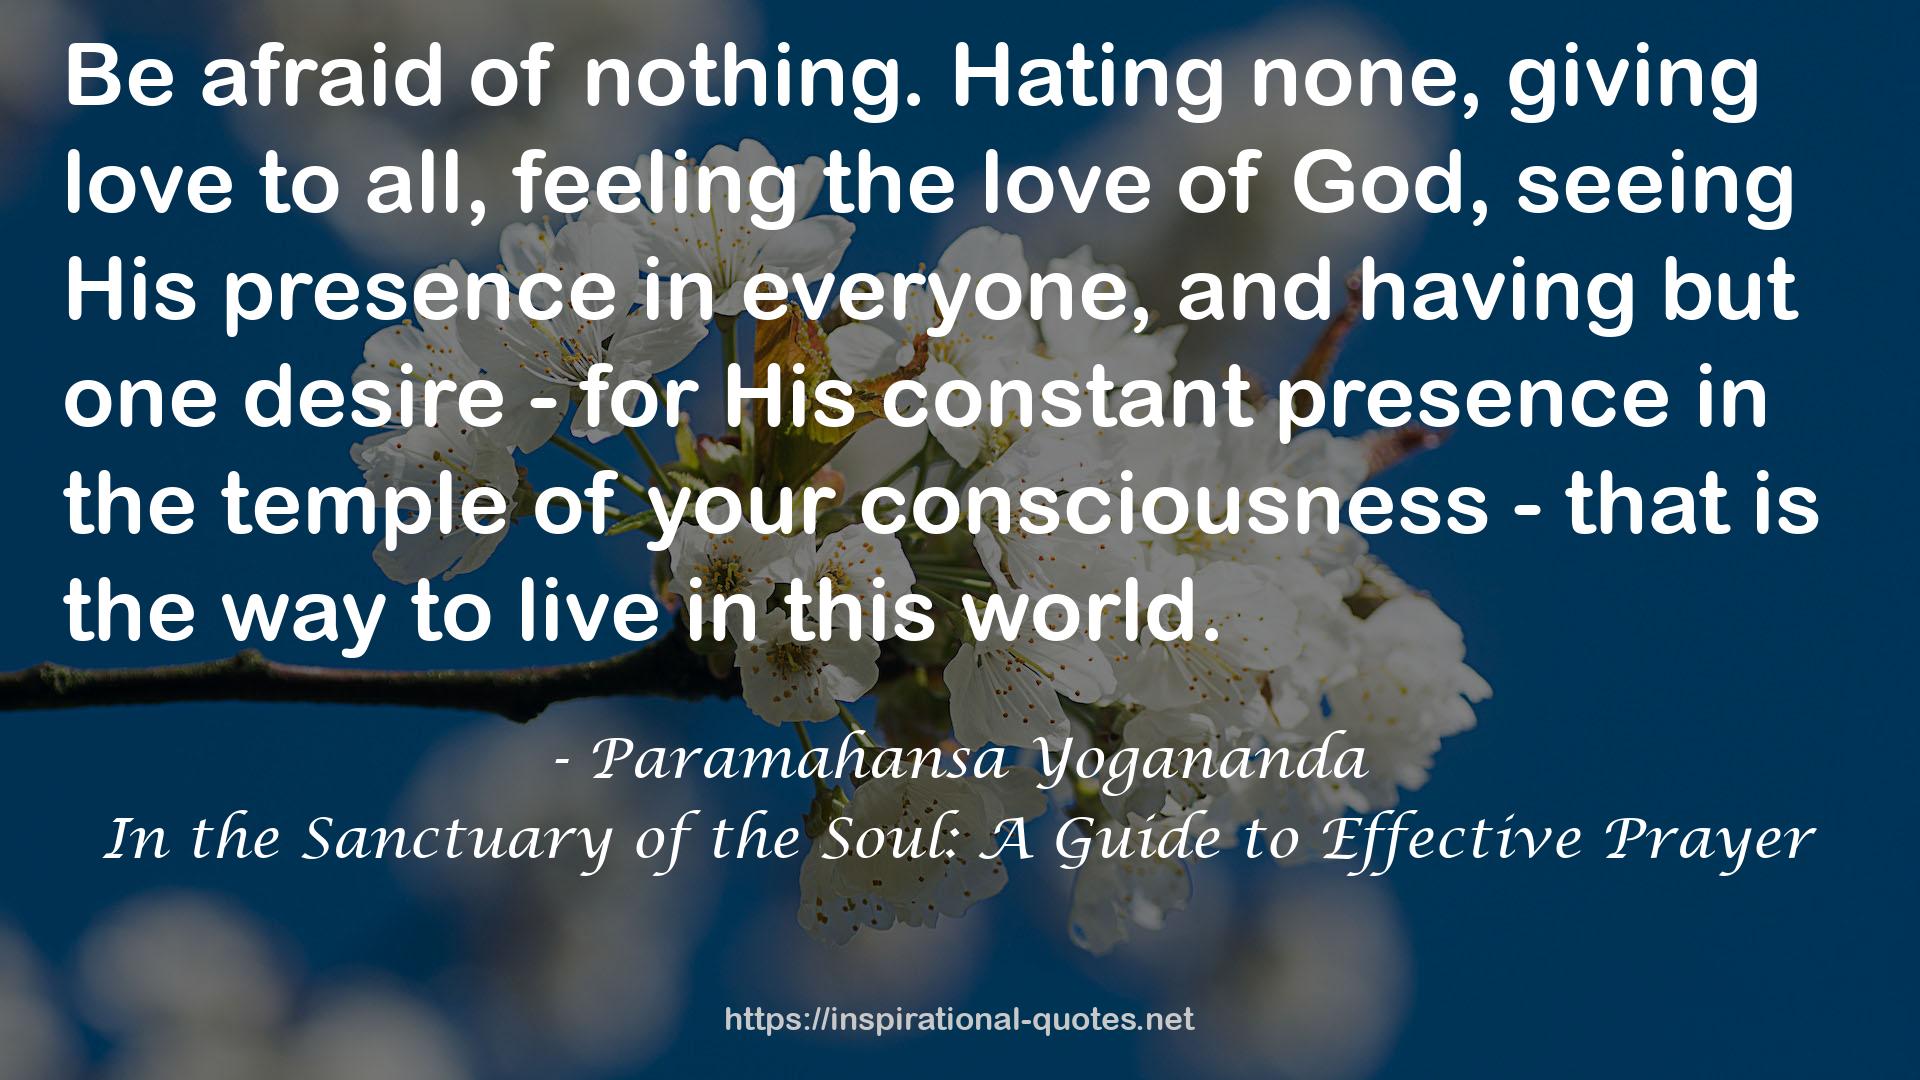 In the Sanctuary of the Soul: A Guide to Effective Prayer QUOTES